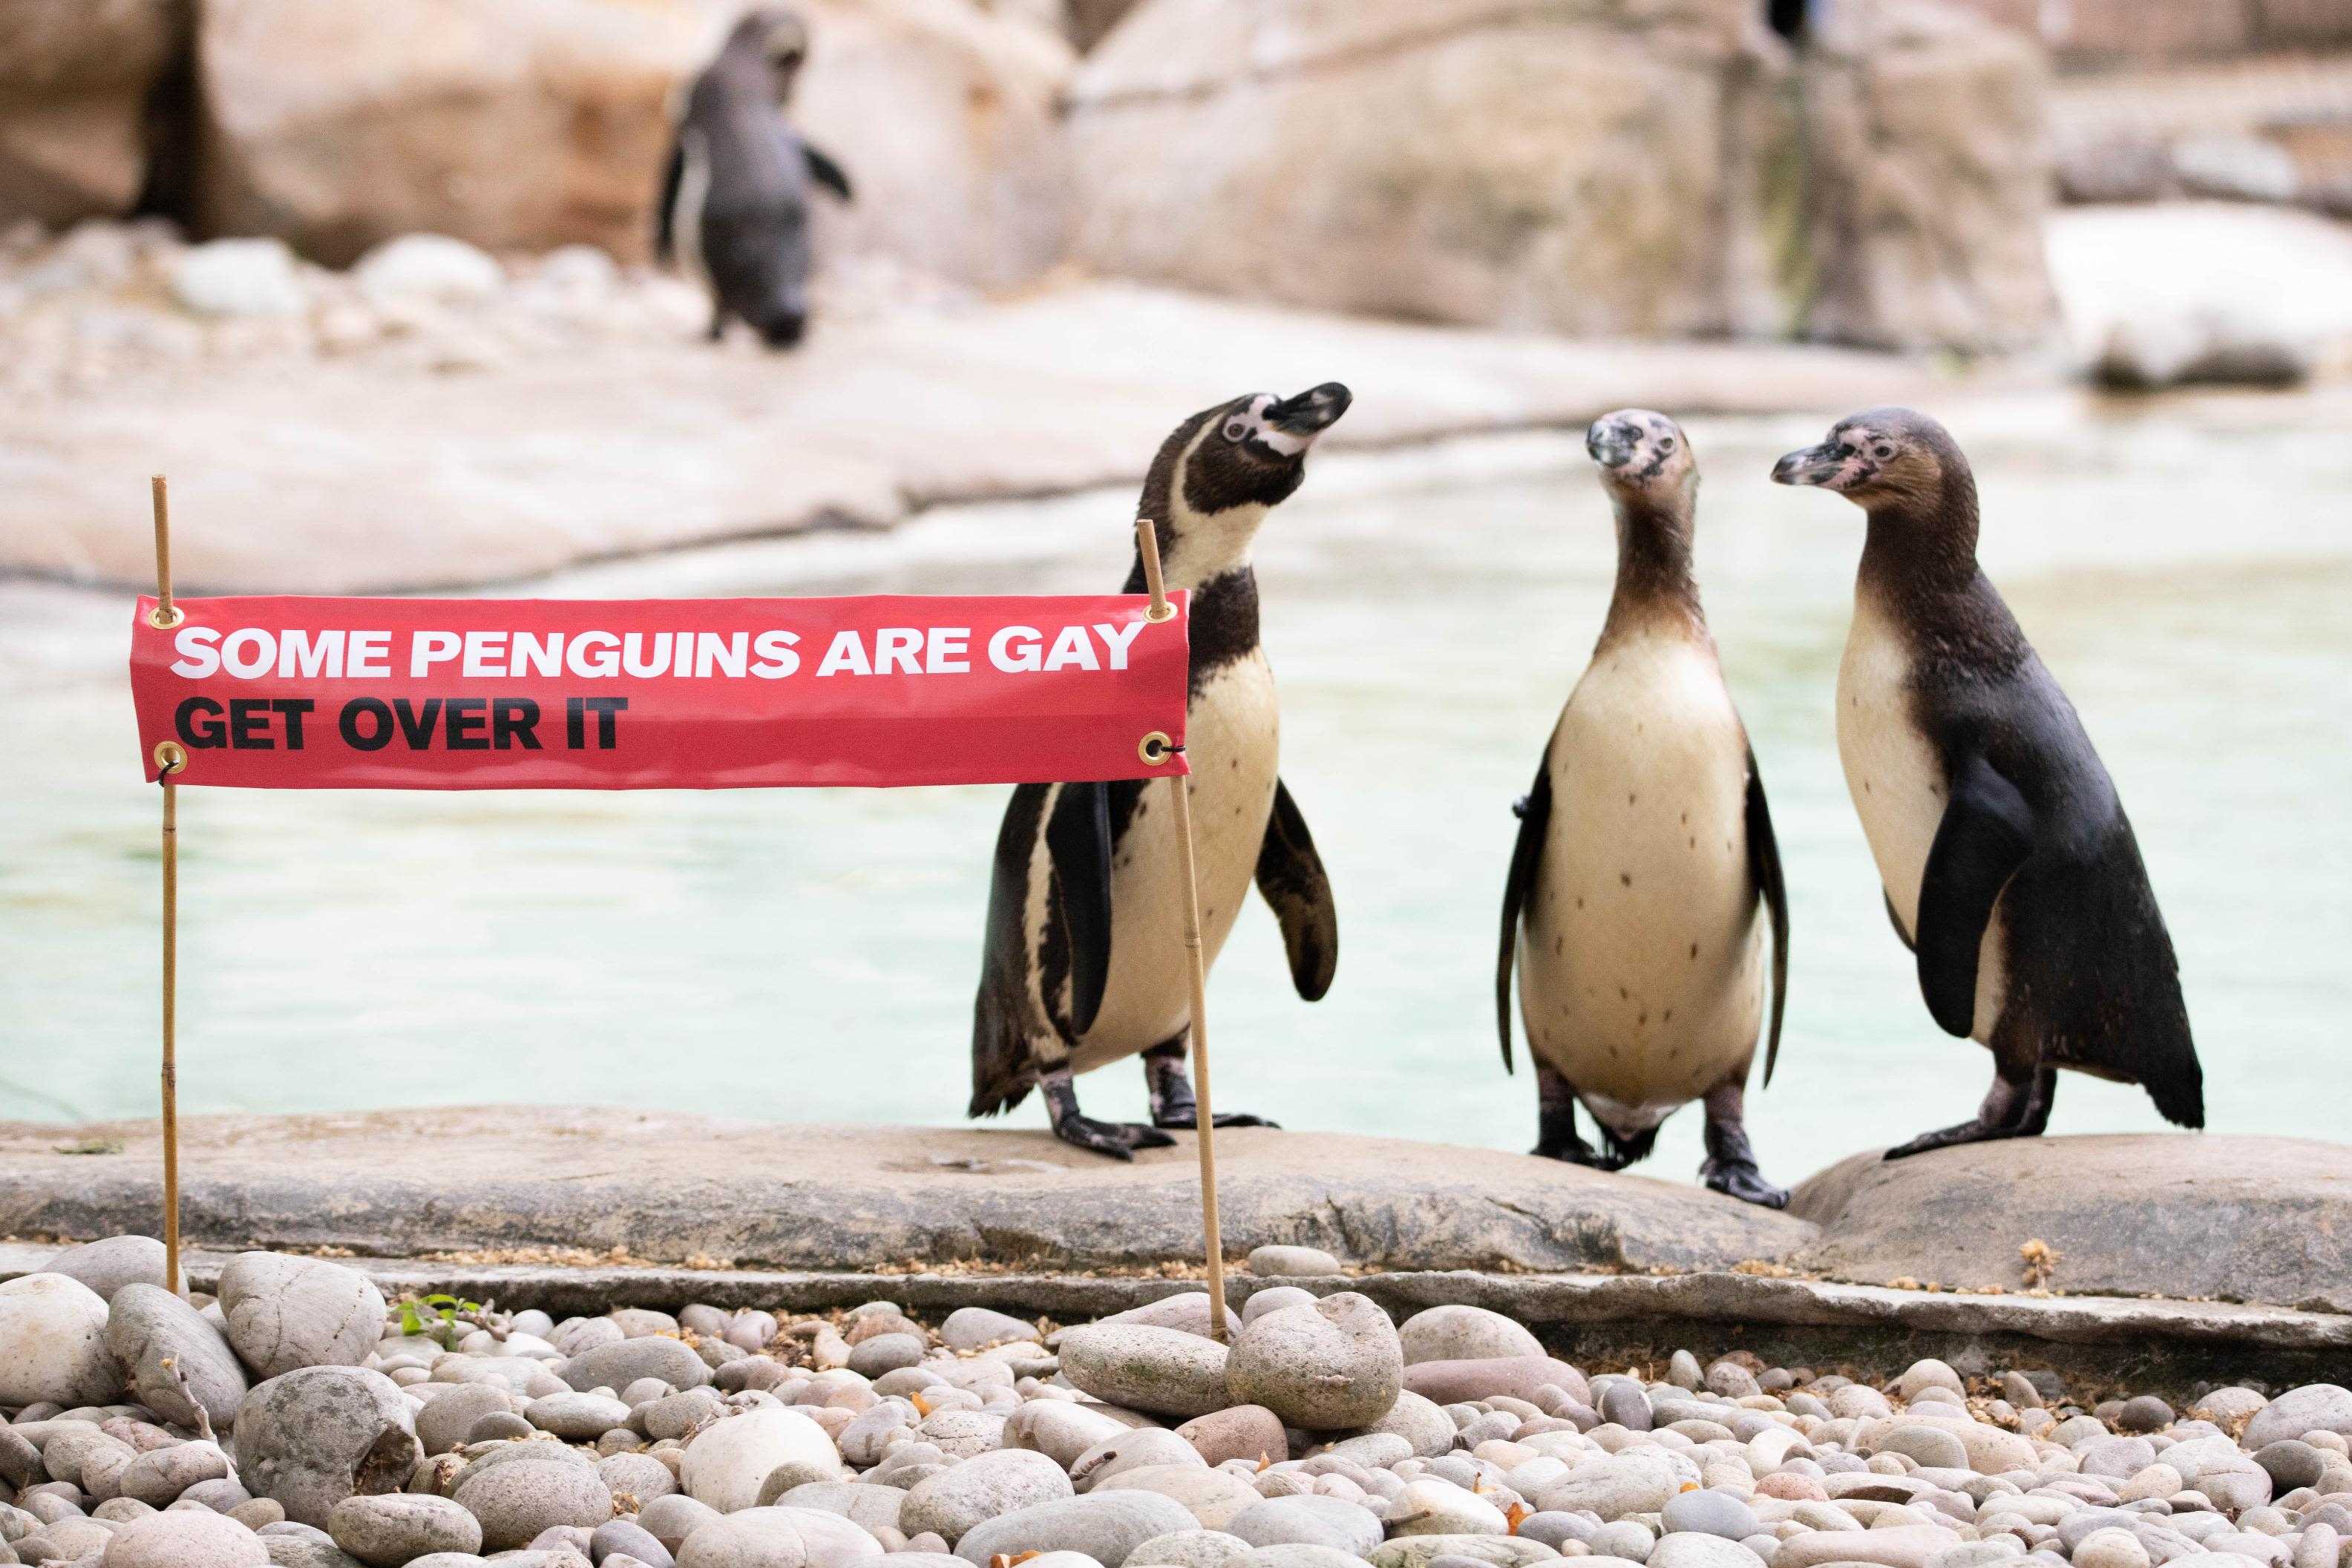 The London Zoo is celebrating Pride month in honor of its gay penguins | CNN